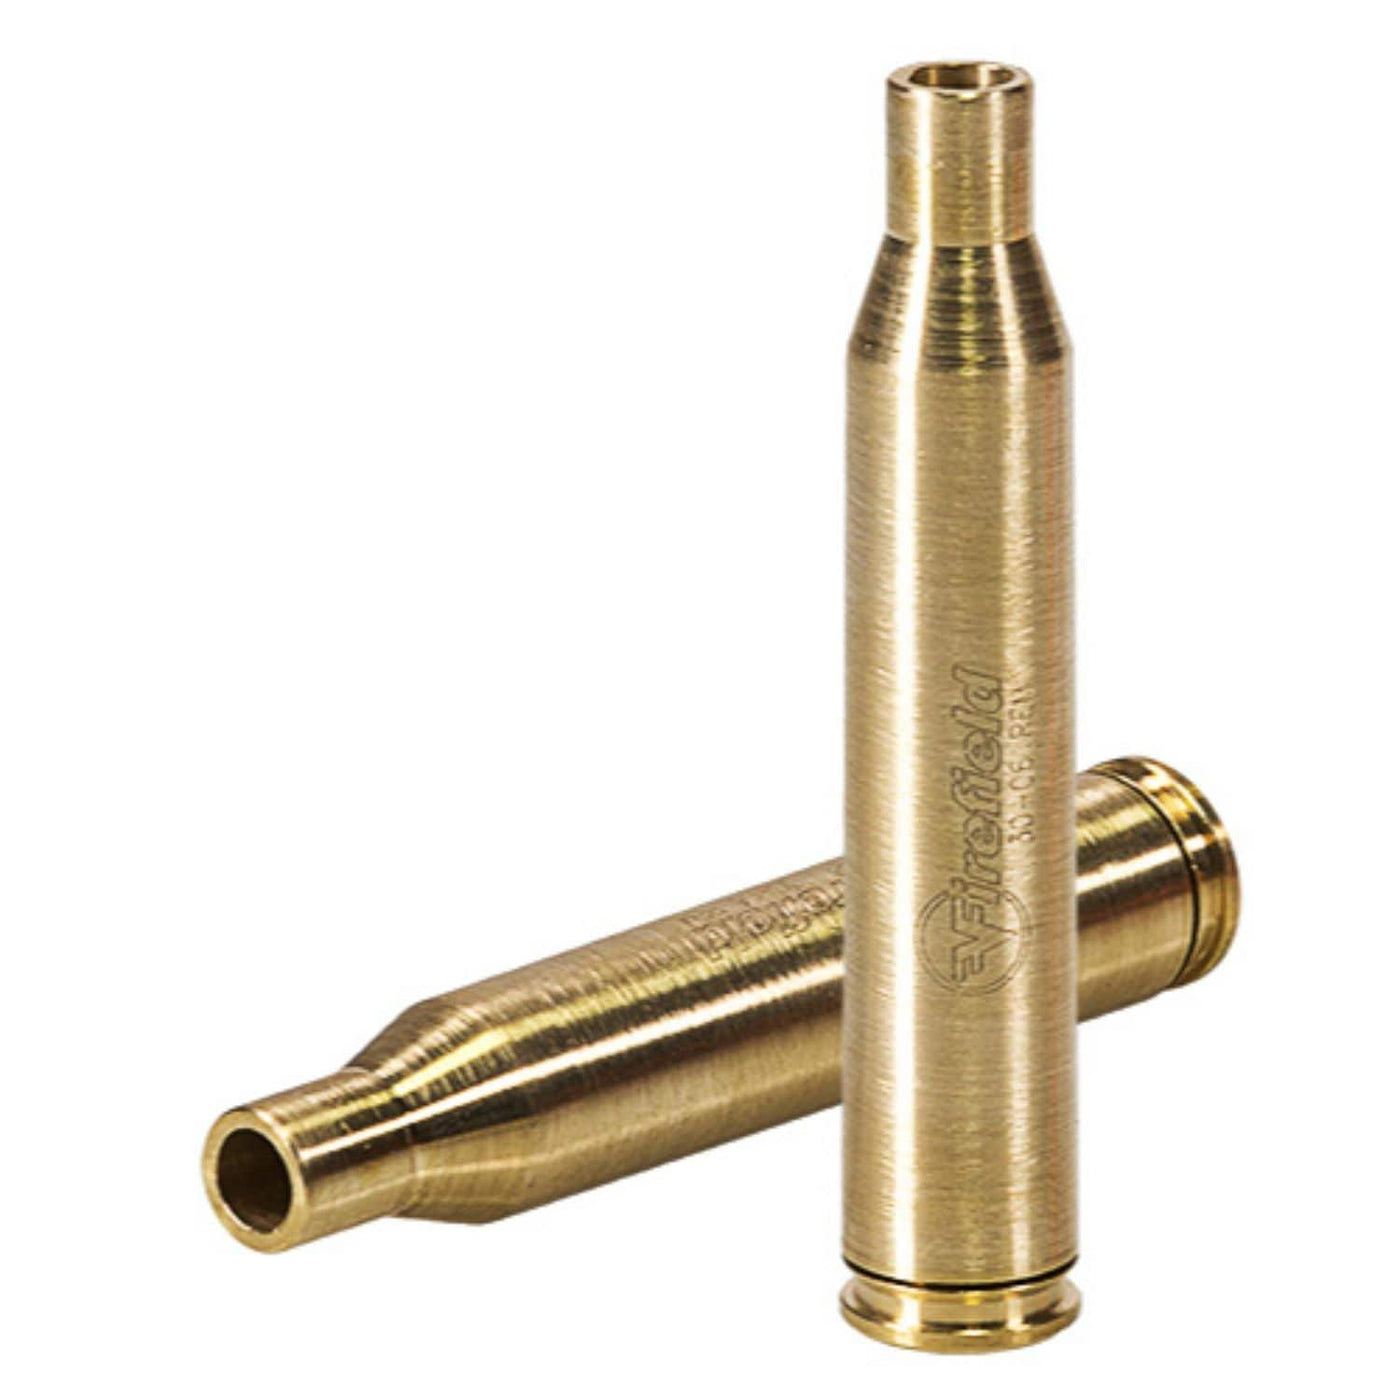 Firefield Firefield .30-06 In-Chamber Red Laser Brass Boresight Optics And Sights